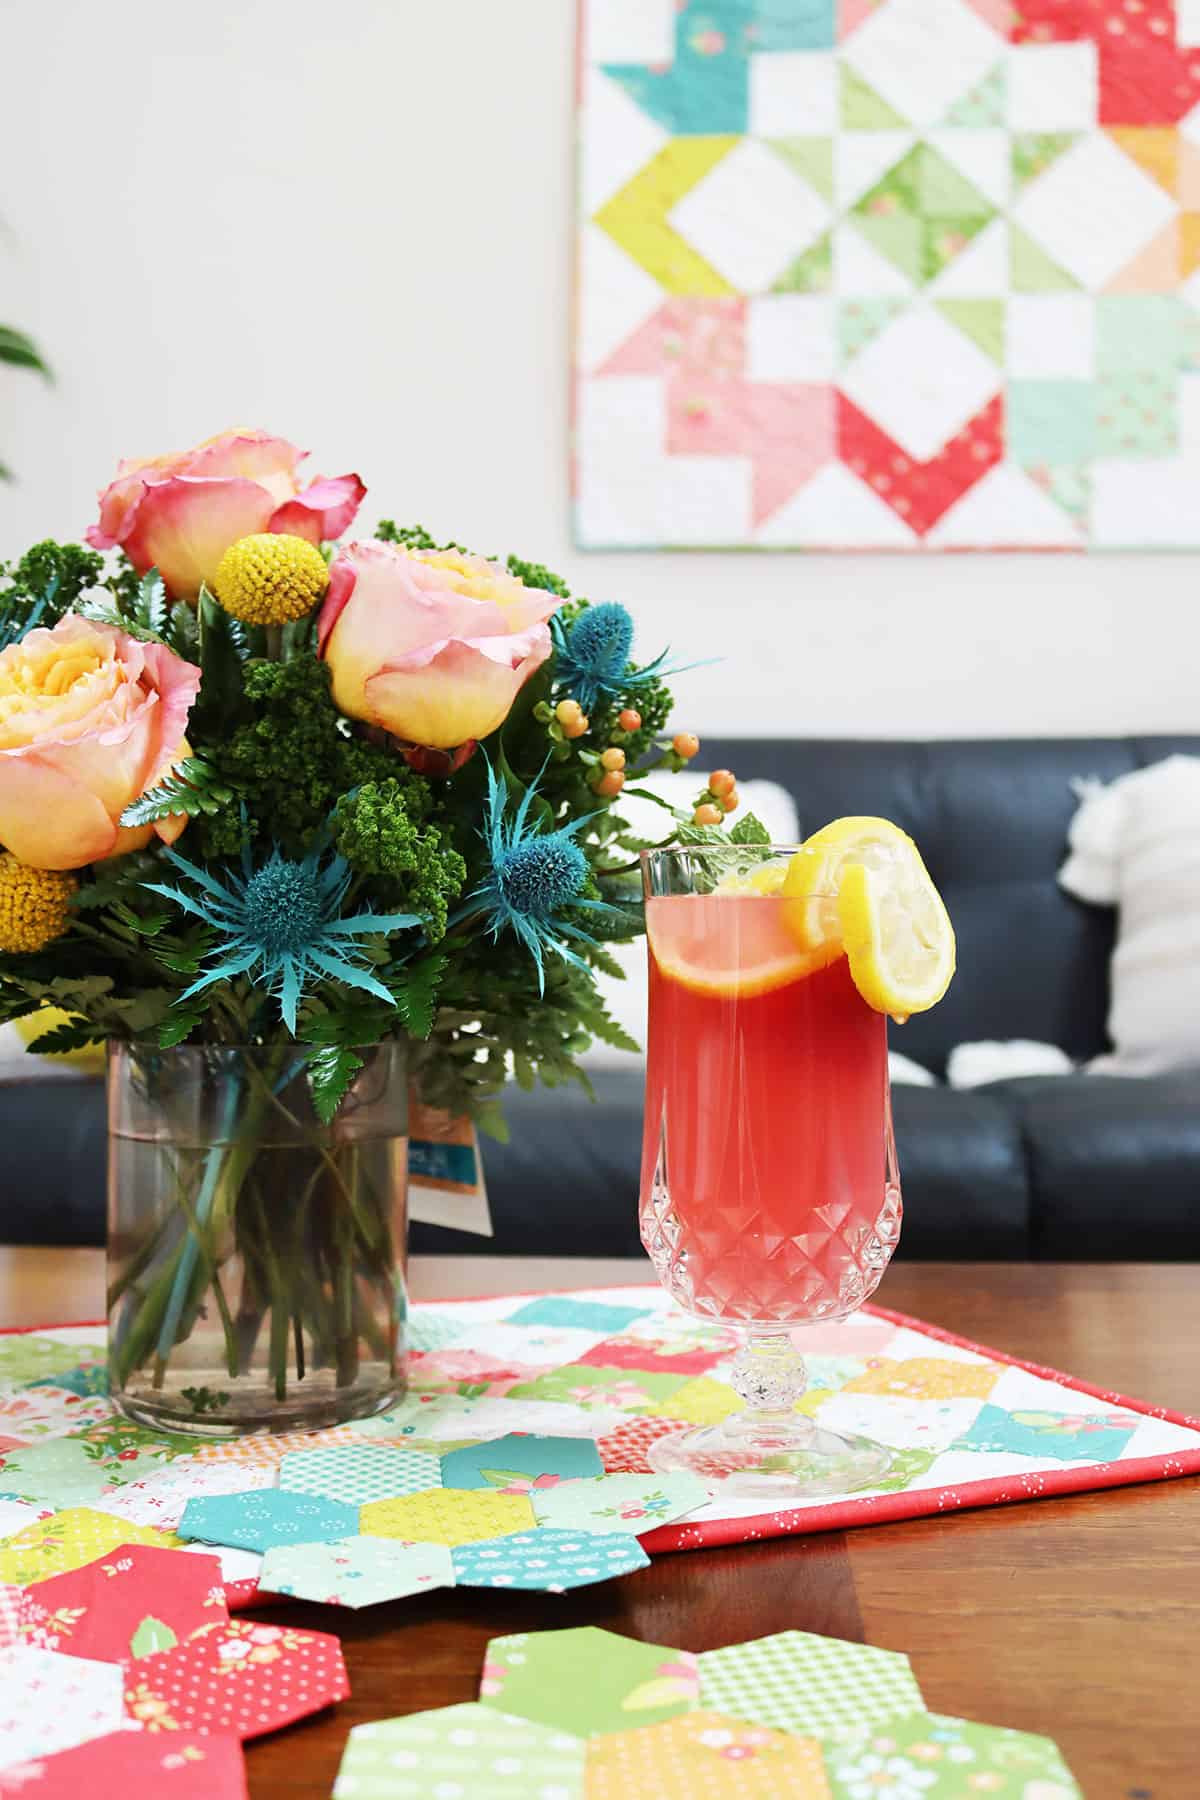 Flowers with glass of lemonade with quilt on the wall and on the table